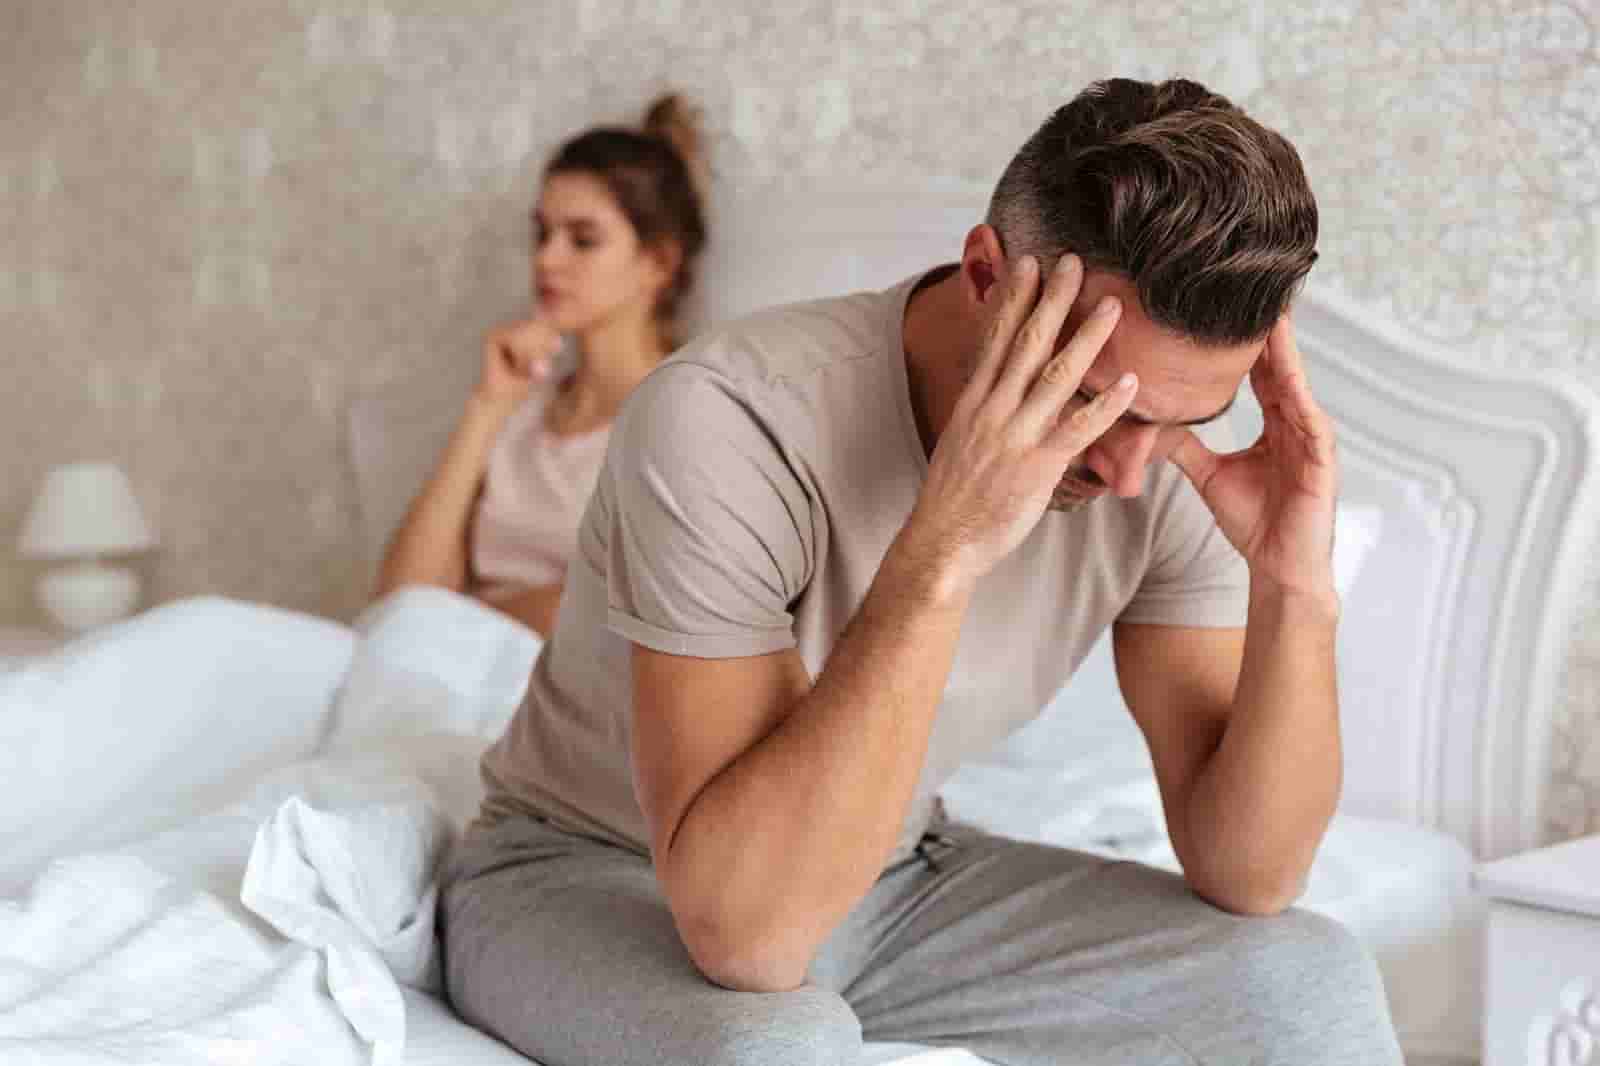 Impact of Pornography Addiction on Mental and Emotional Health